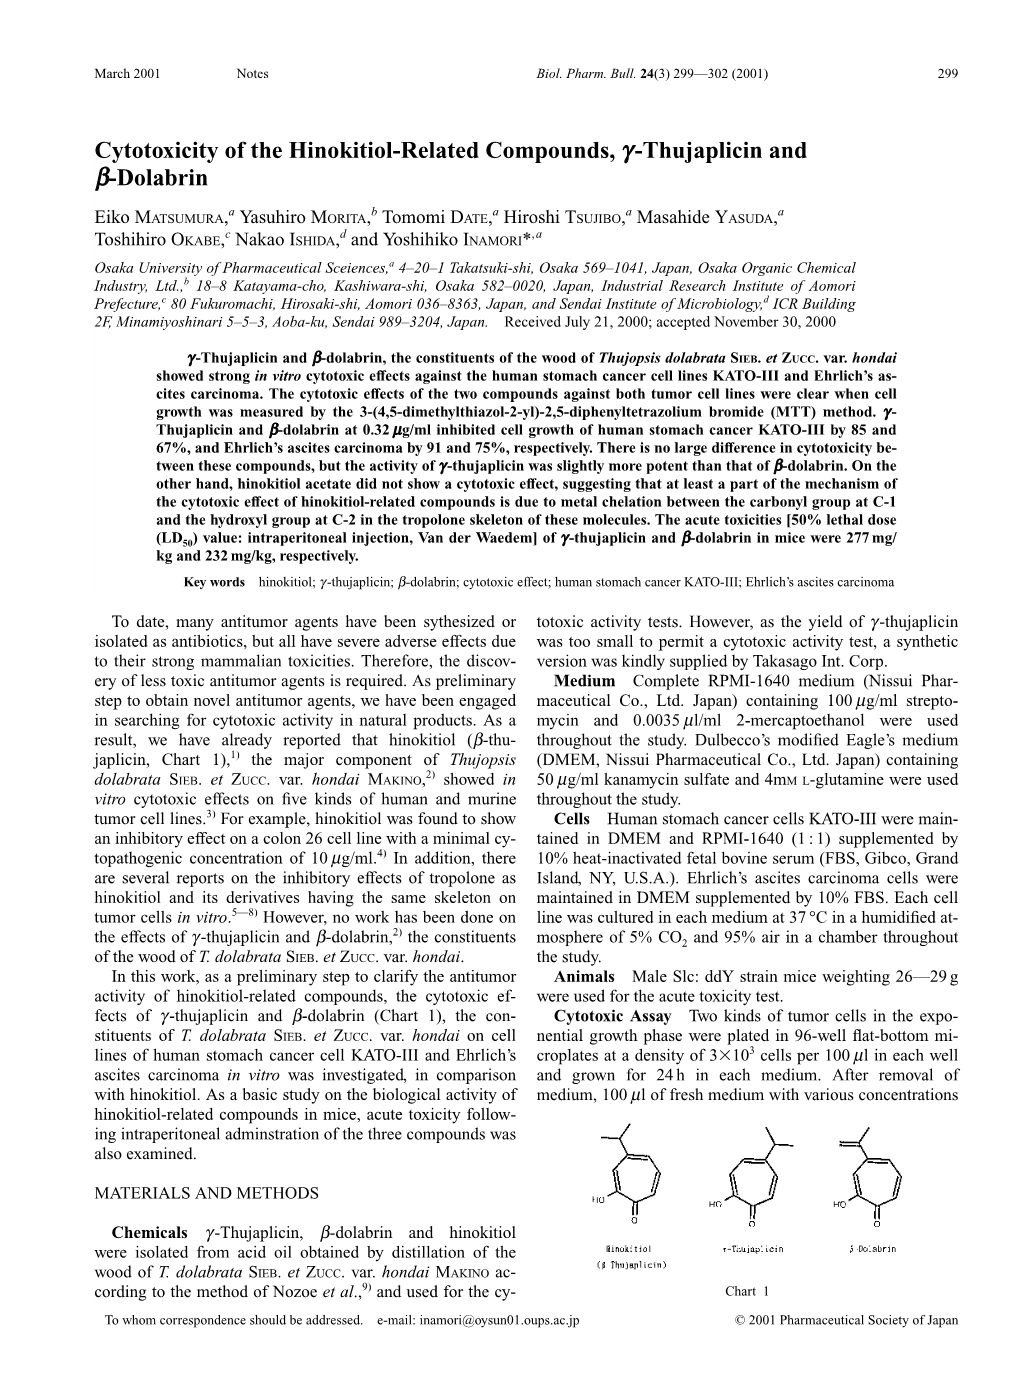 Cytotoxicity of the Hinokitiol-Related Compounds, G-Thujaplicin and B-Dolabrin